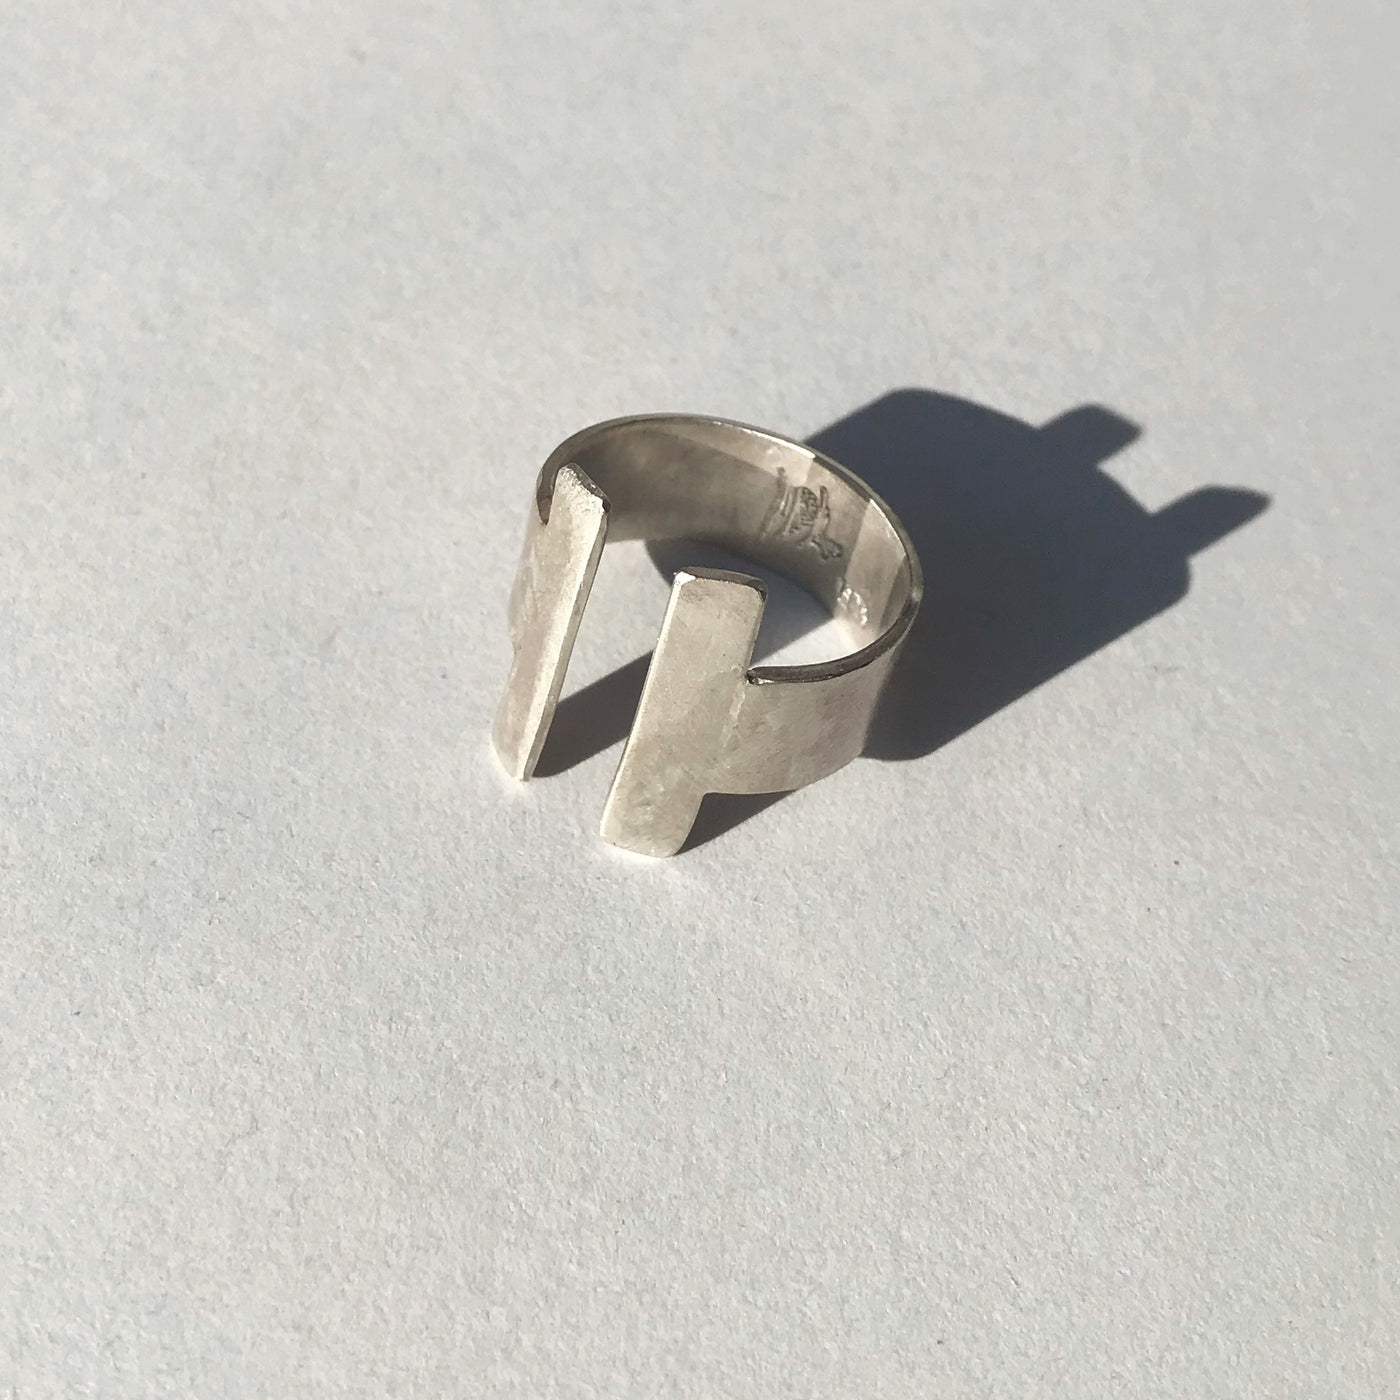 OPEN SILVER RING WITH UNEVEN BARS - 925 SILVER